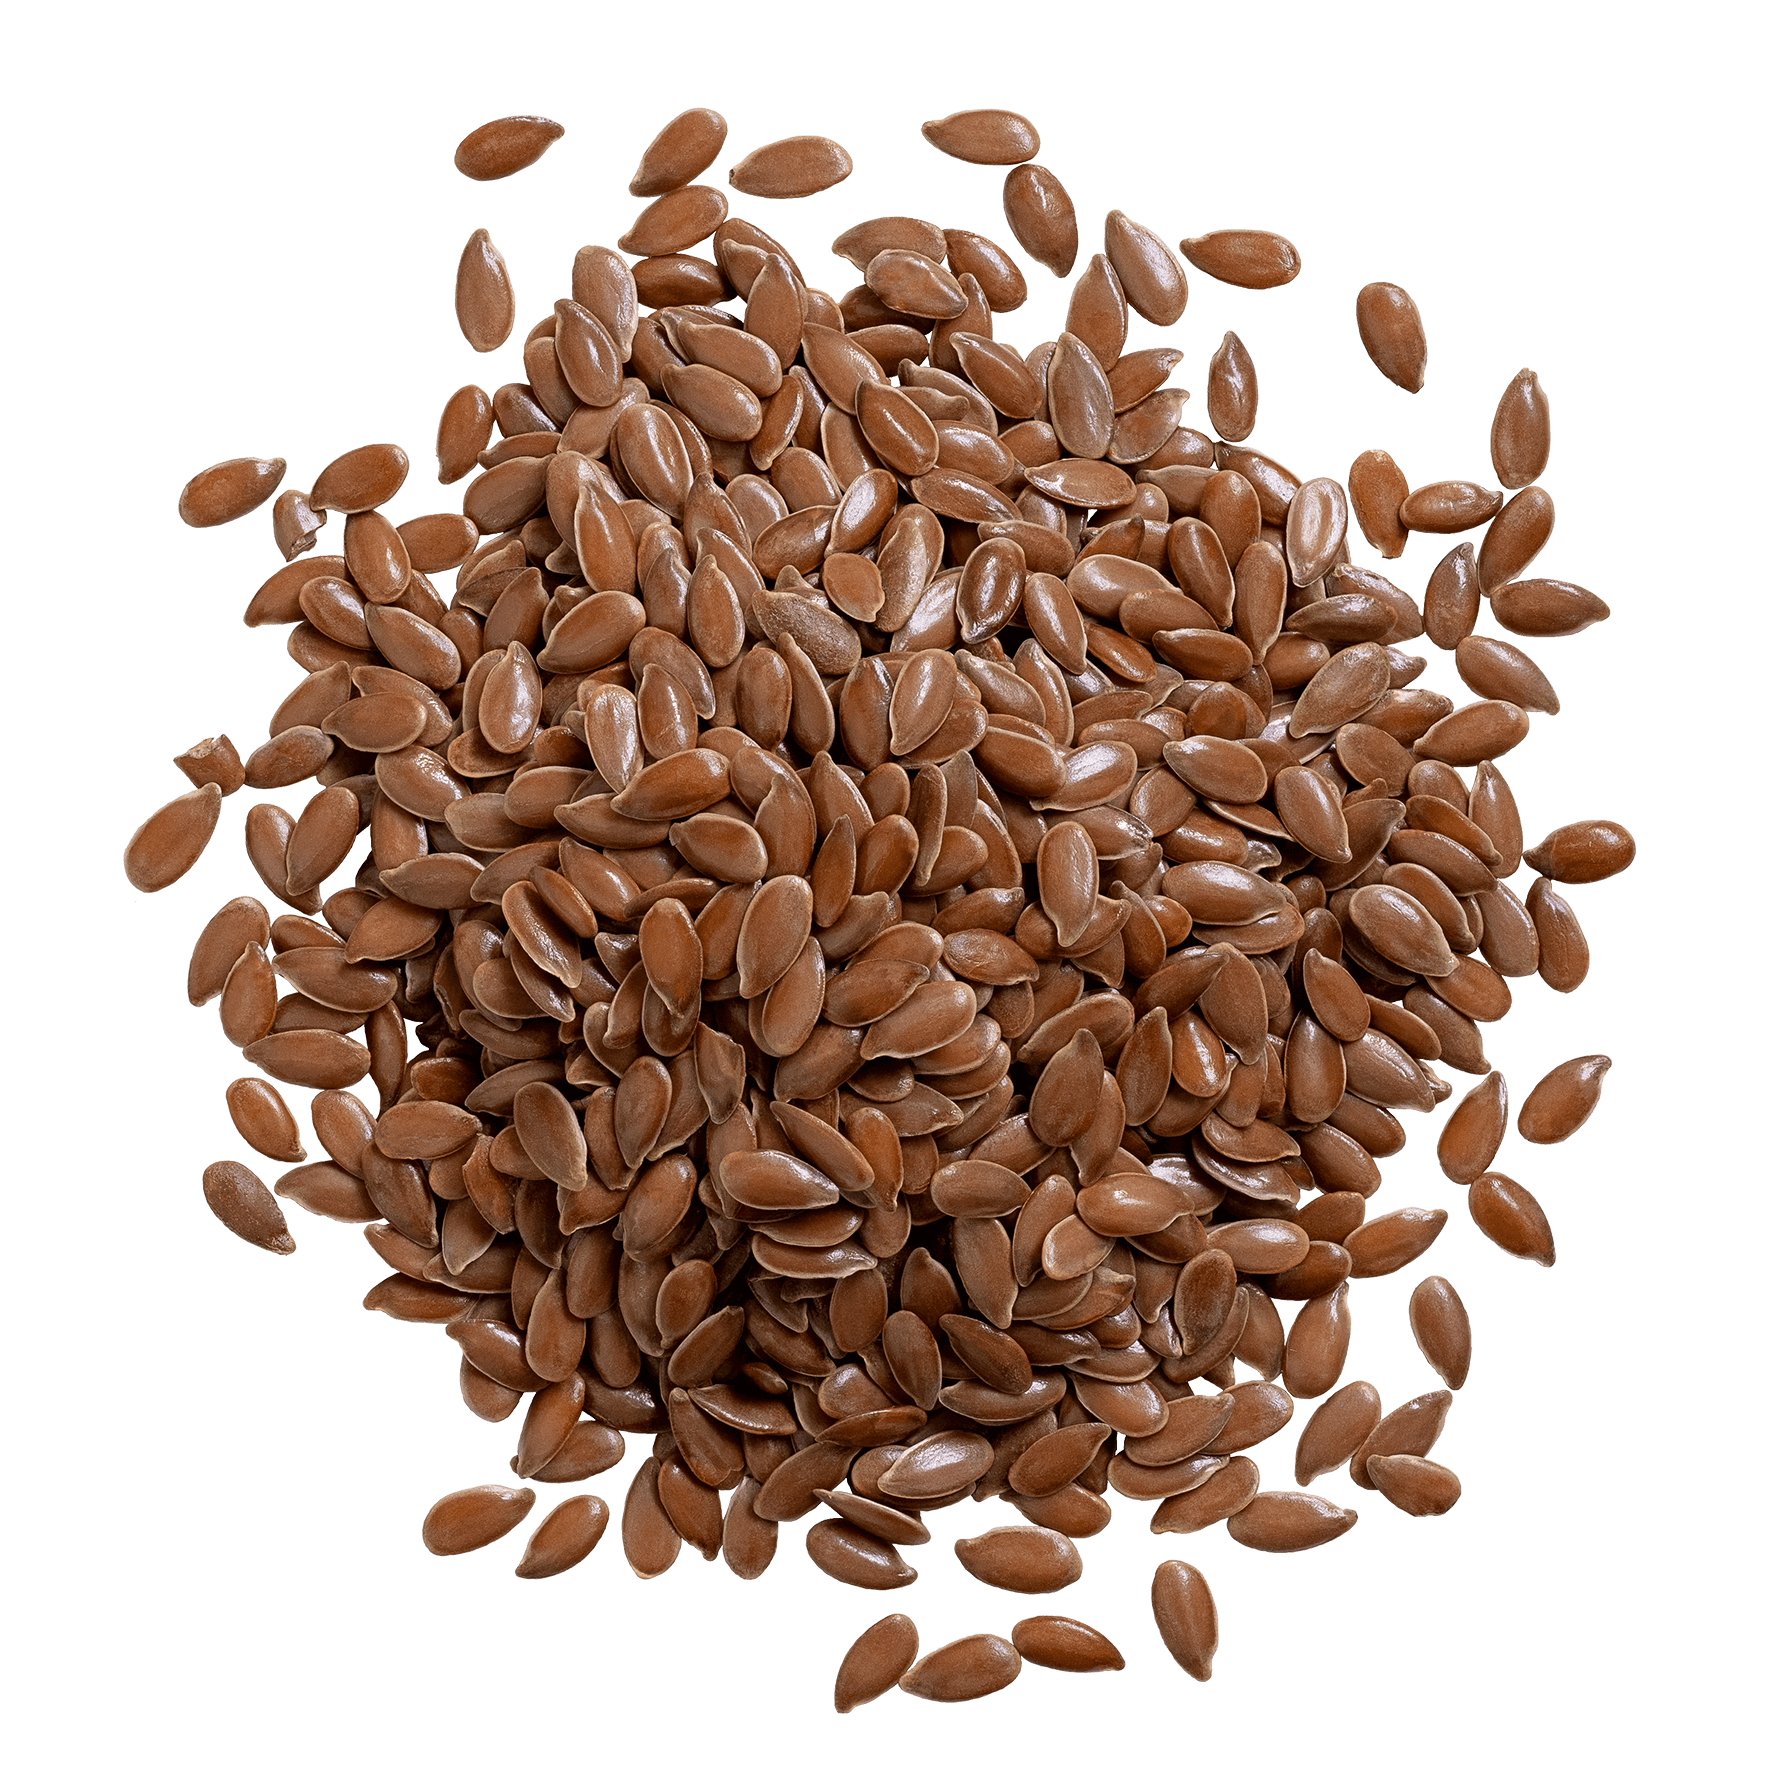 extracted_flaxseed_537326844.png__PID:9d47a0d1-044d-4878-9f05-58cf84e2b619